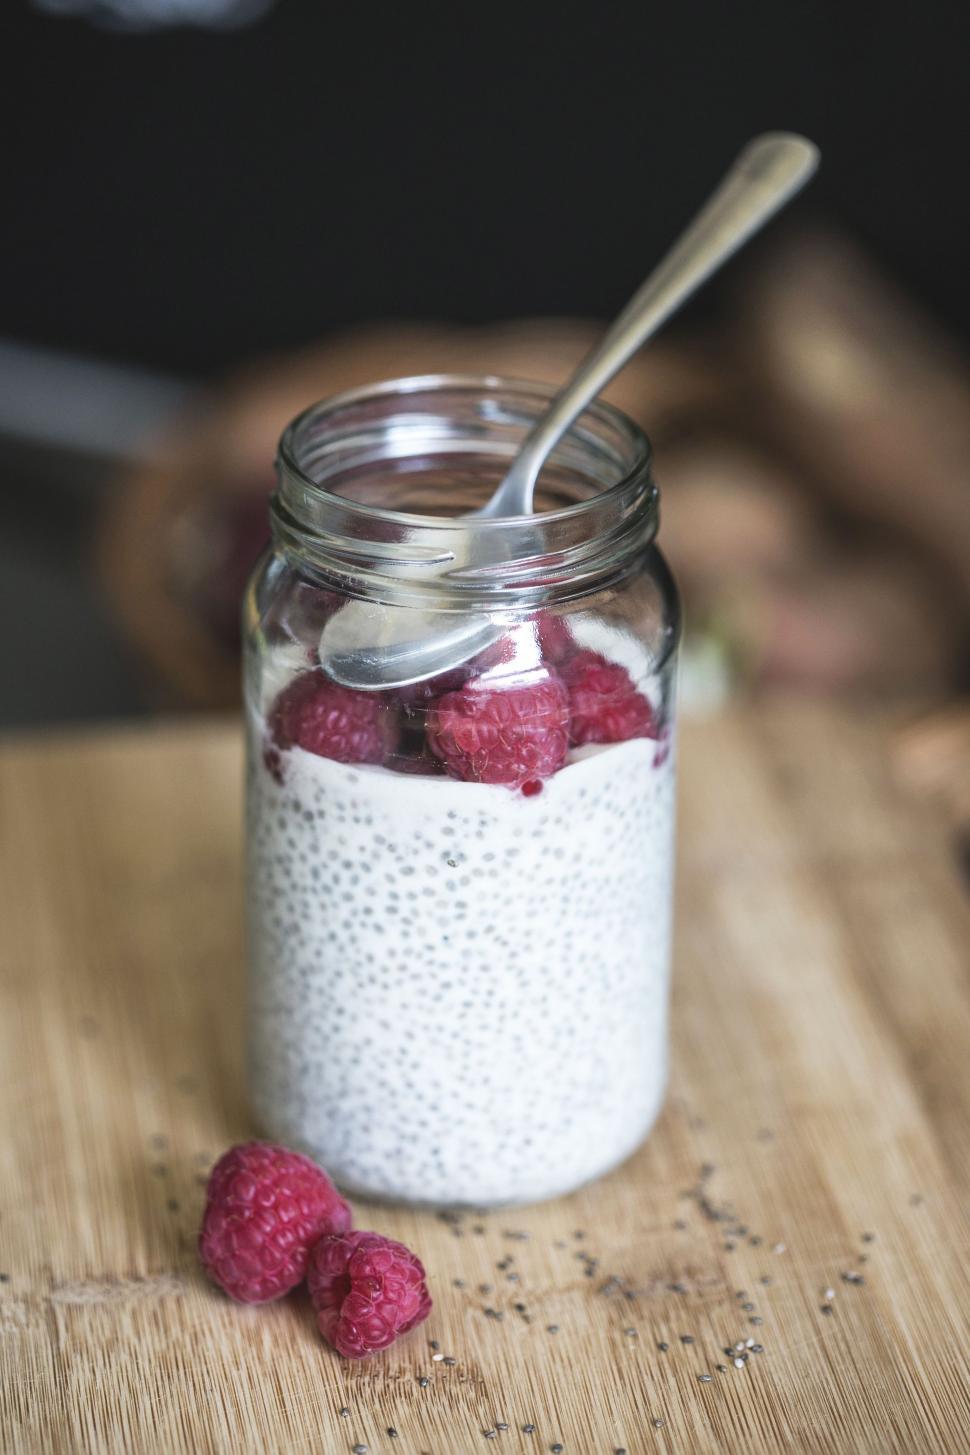 Free Image of A Jar of Chia Seed Pudding With Raspberries 